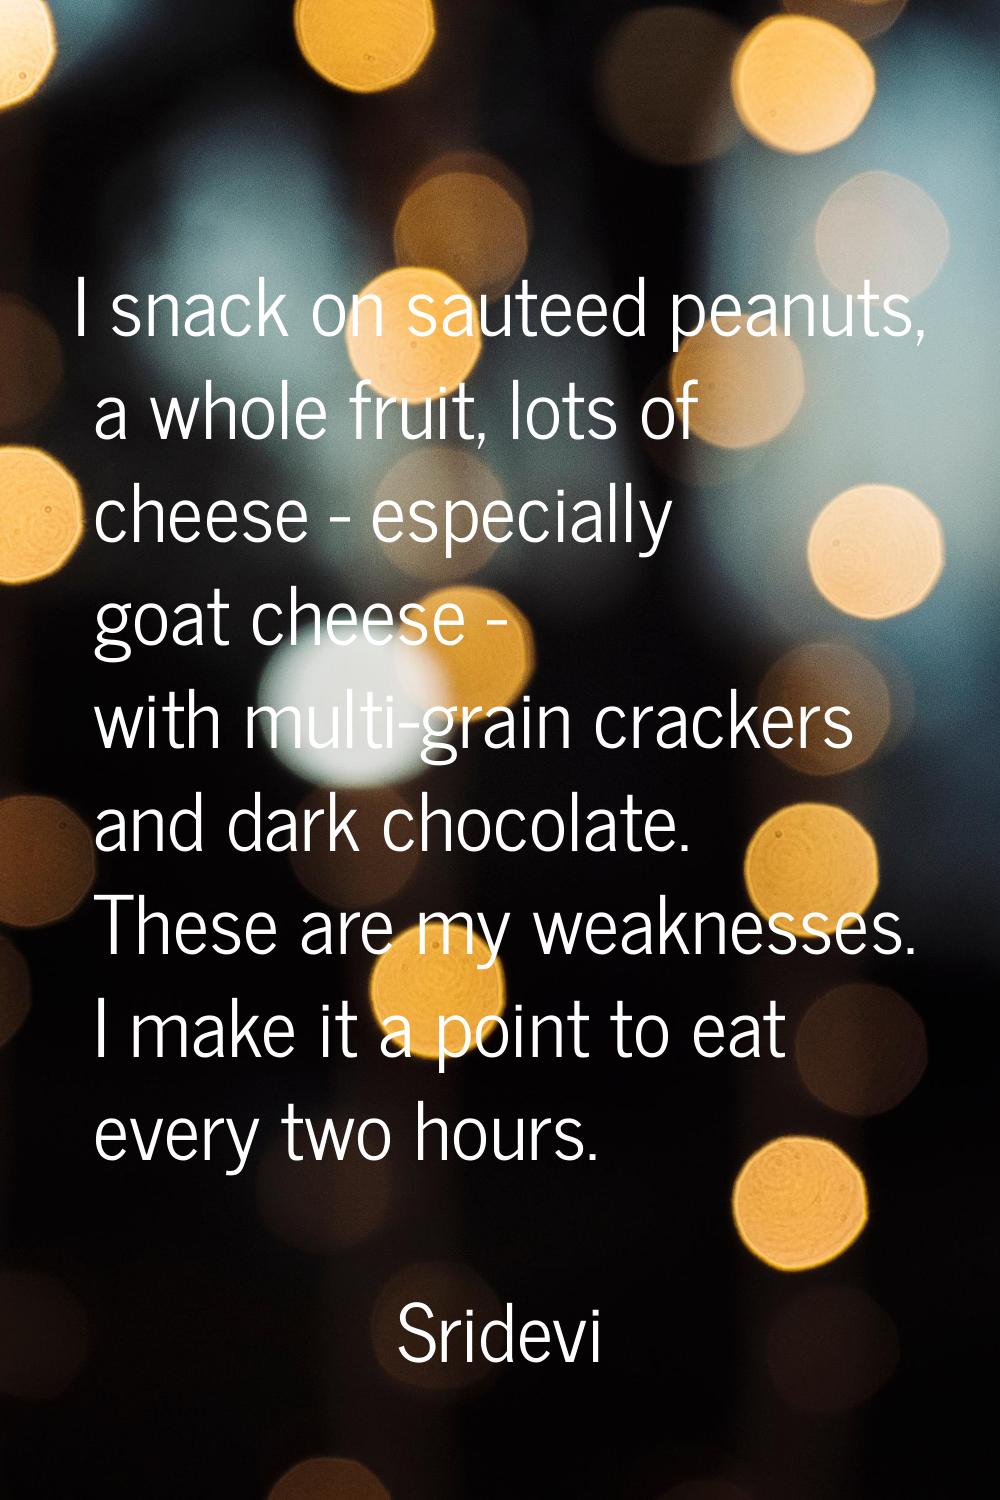 I snack on sauteed peanuts, a whole fruit, lots of cheese - especially goat cheese - with multi-gra